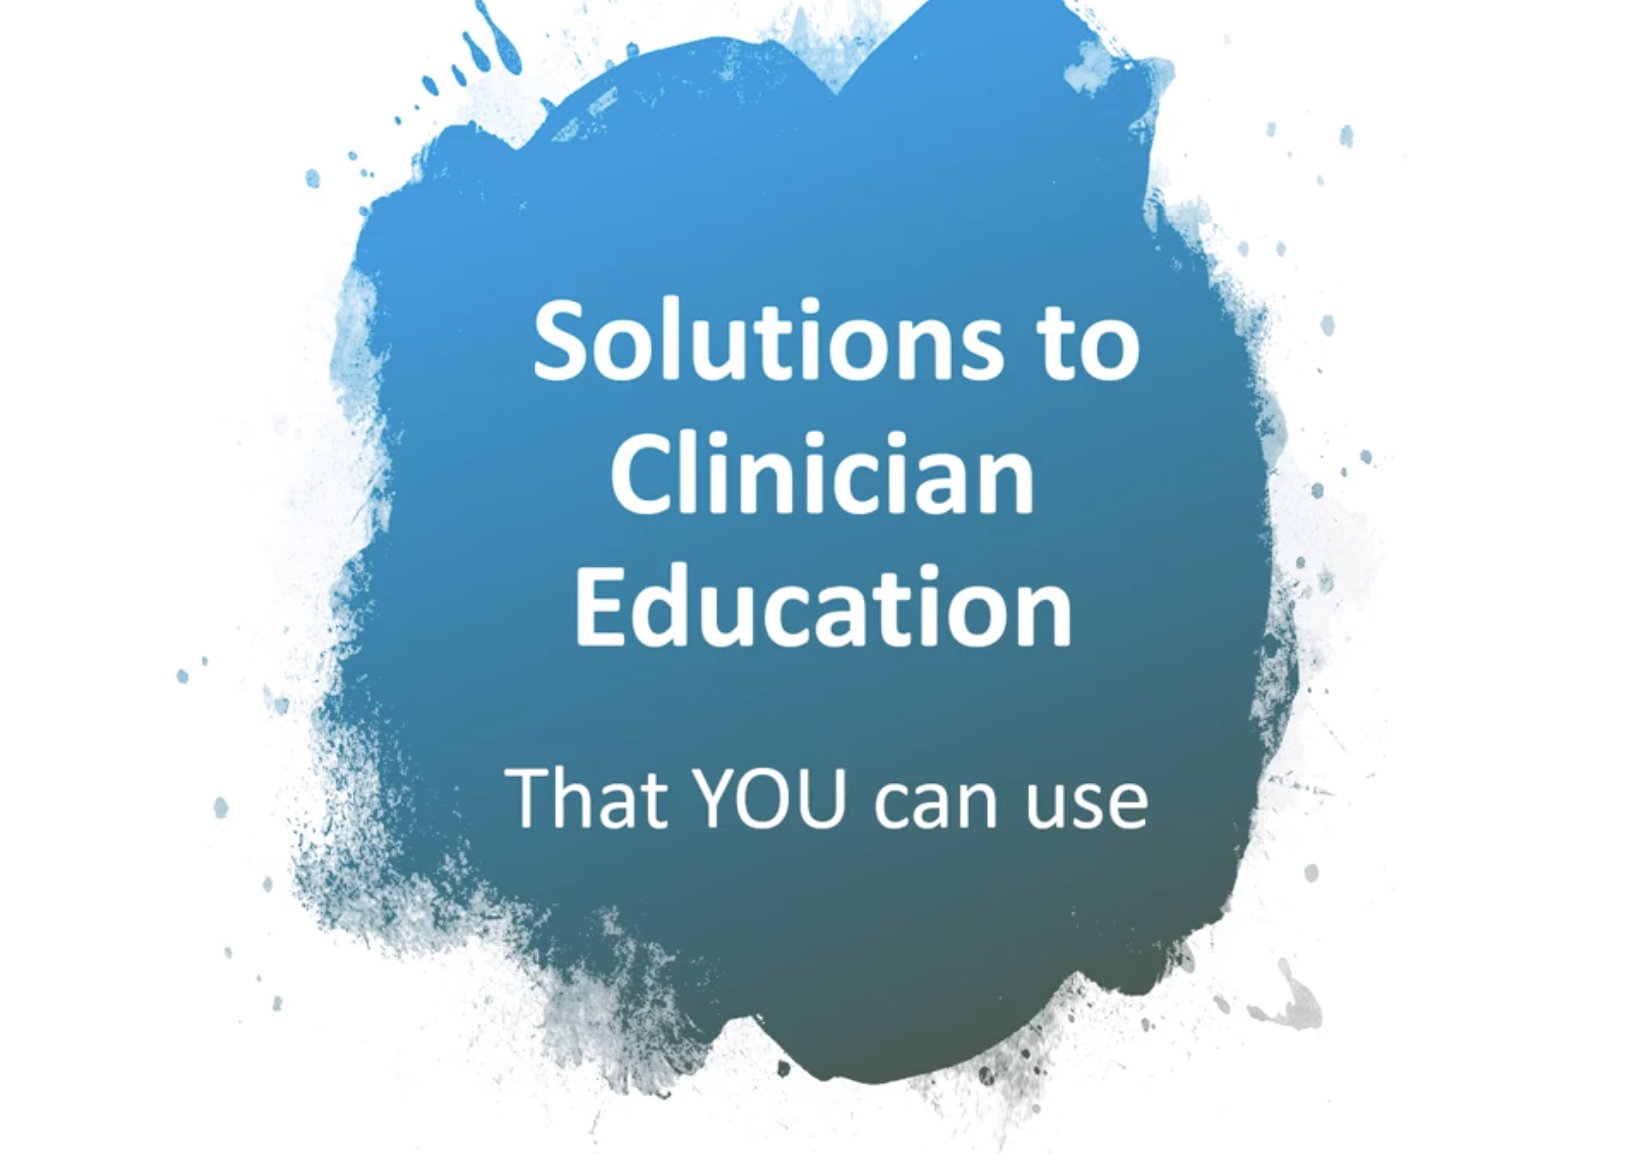 Breakthroughs in Clinician Education in IDD Healthcare